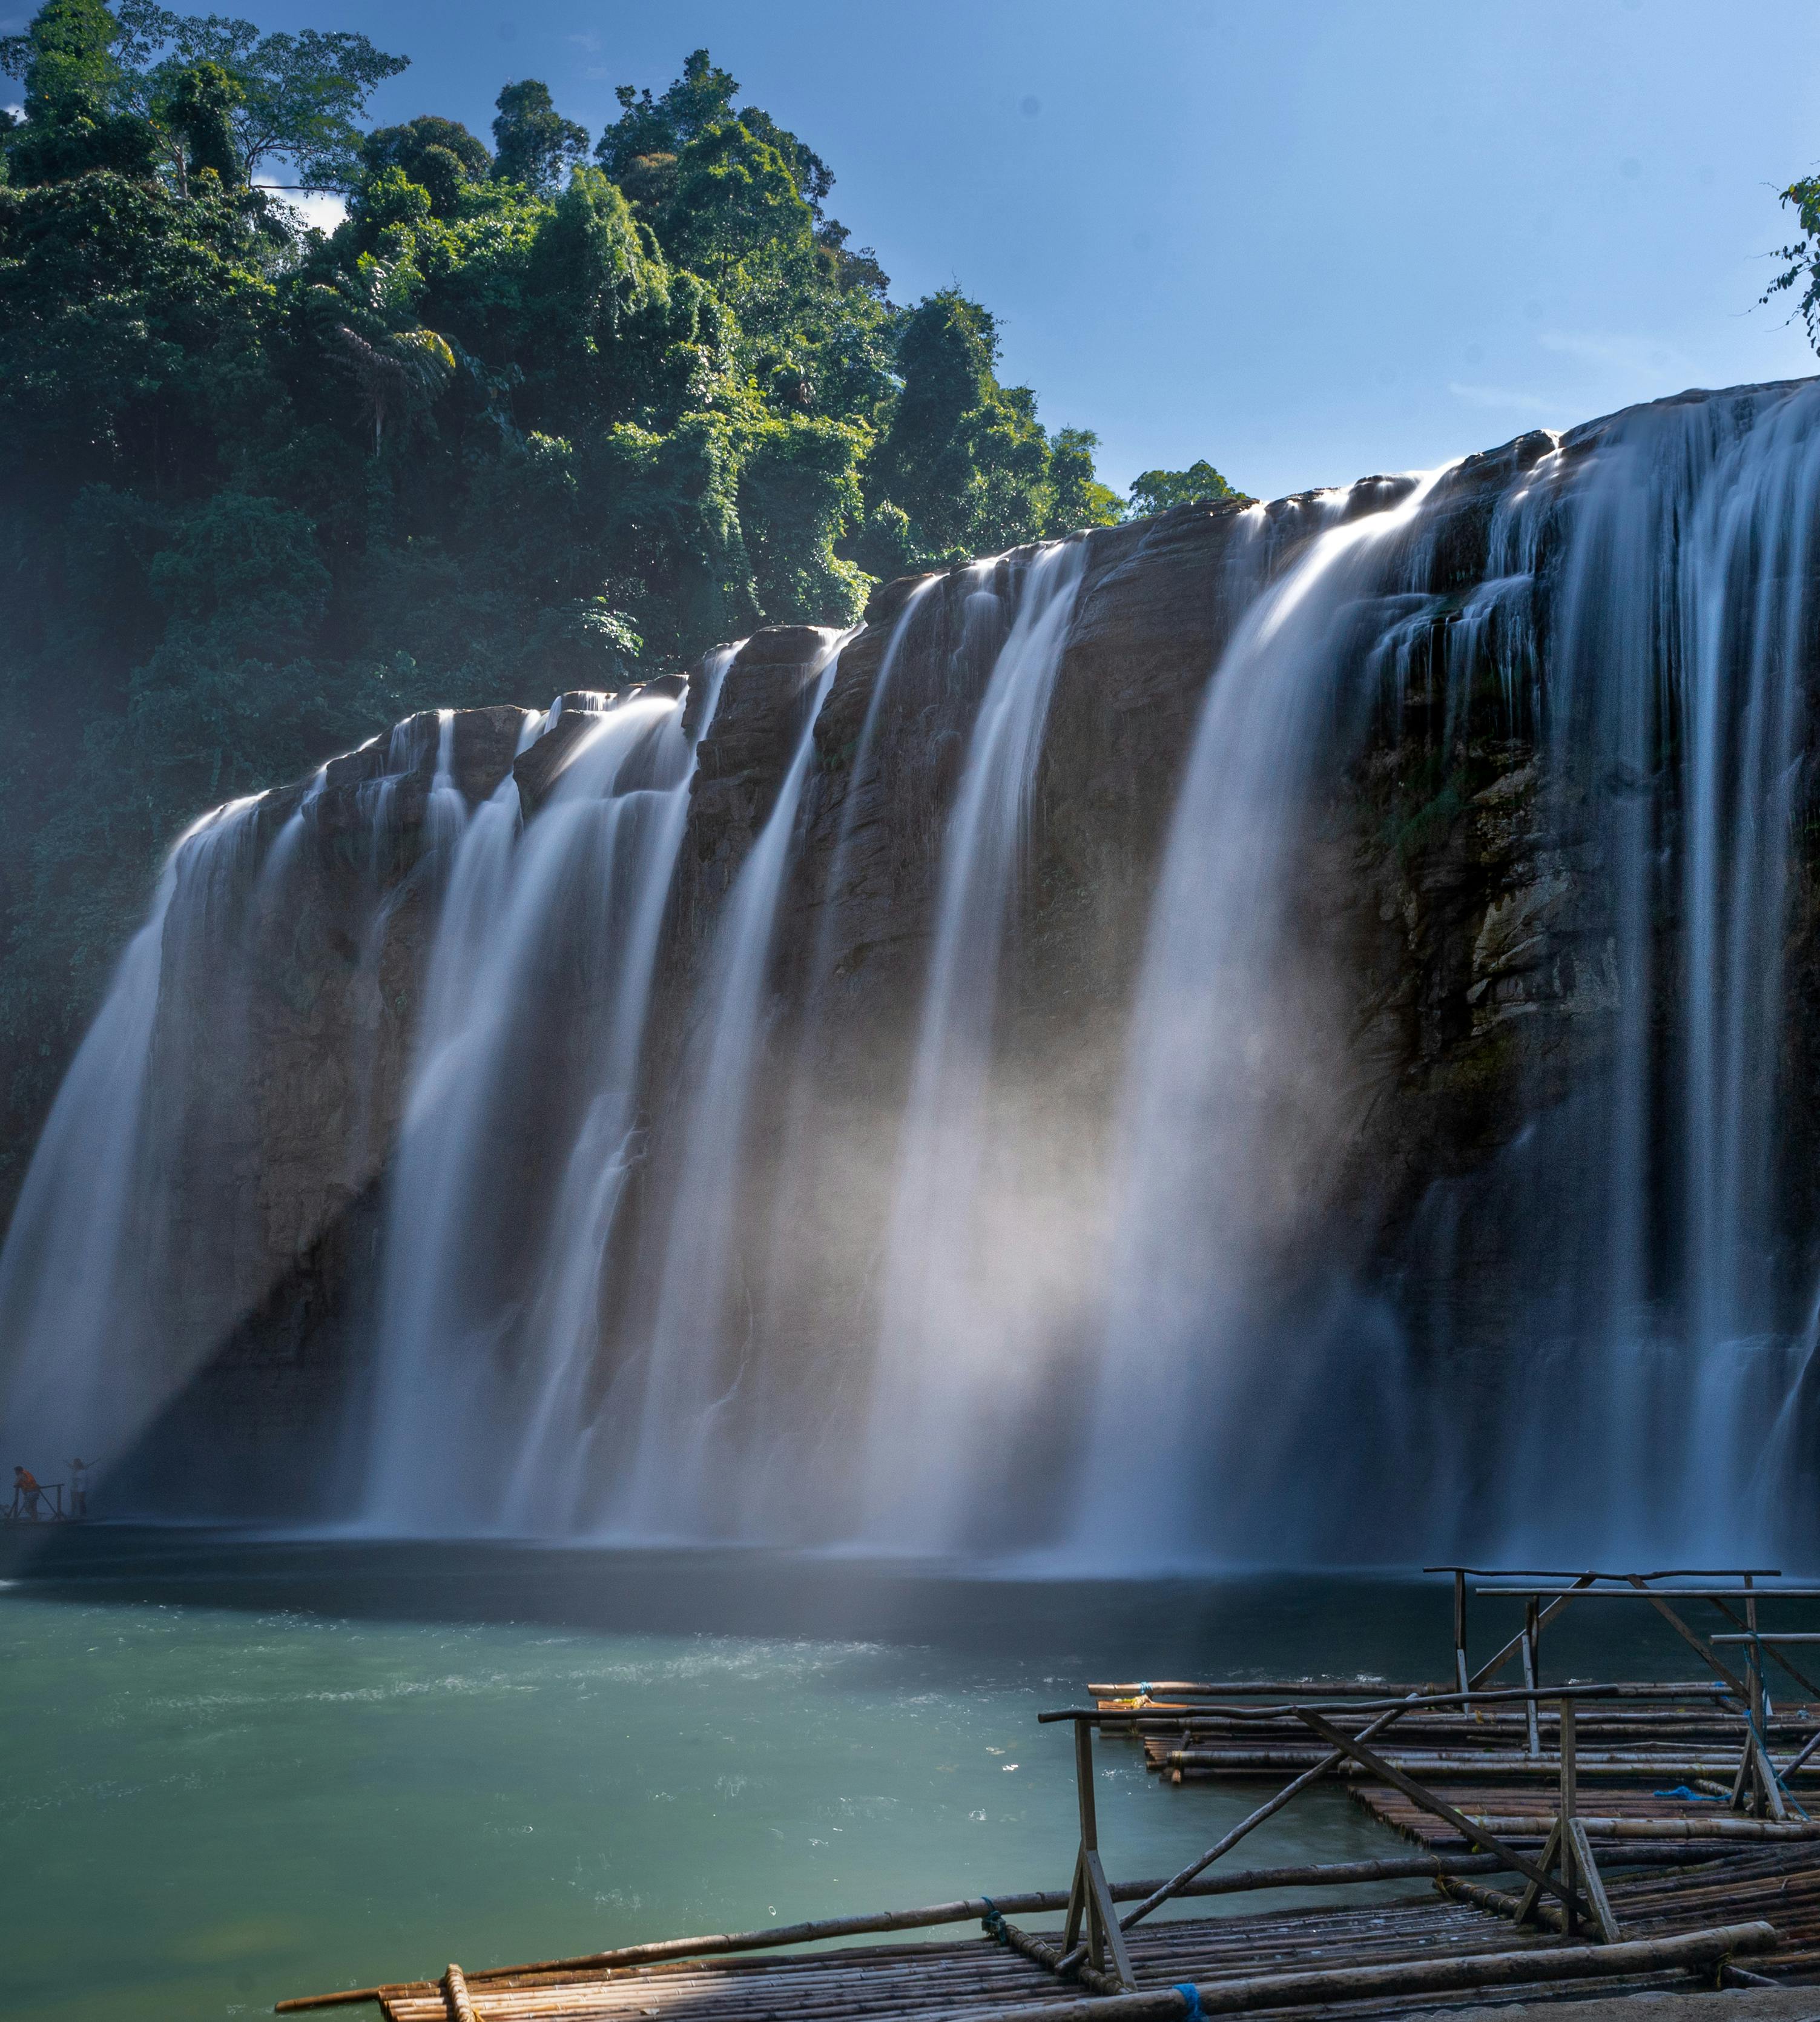 Tinuy-an Falls in the Philippines